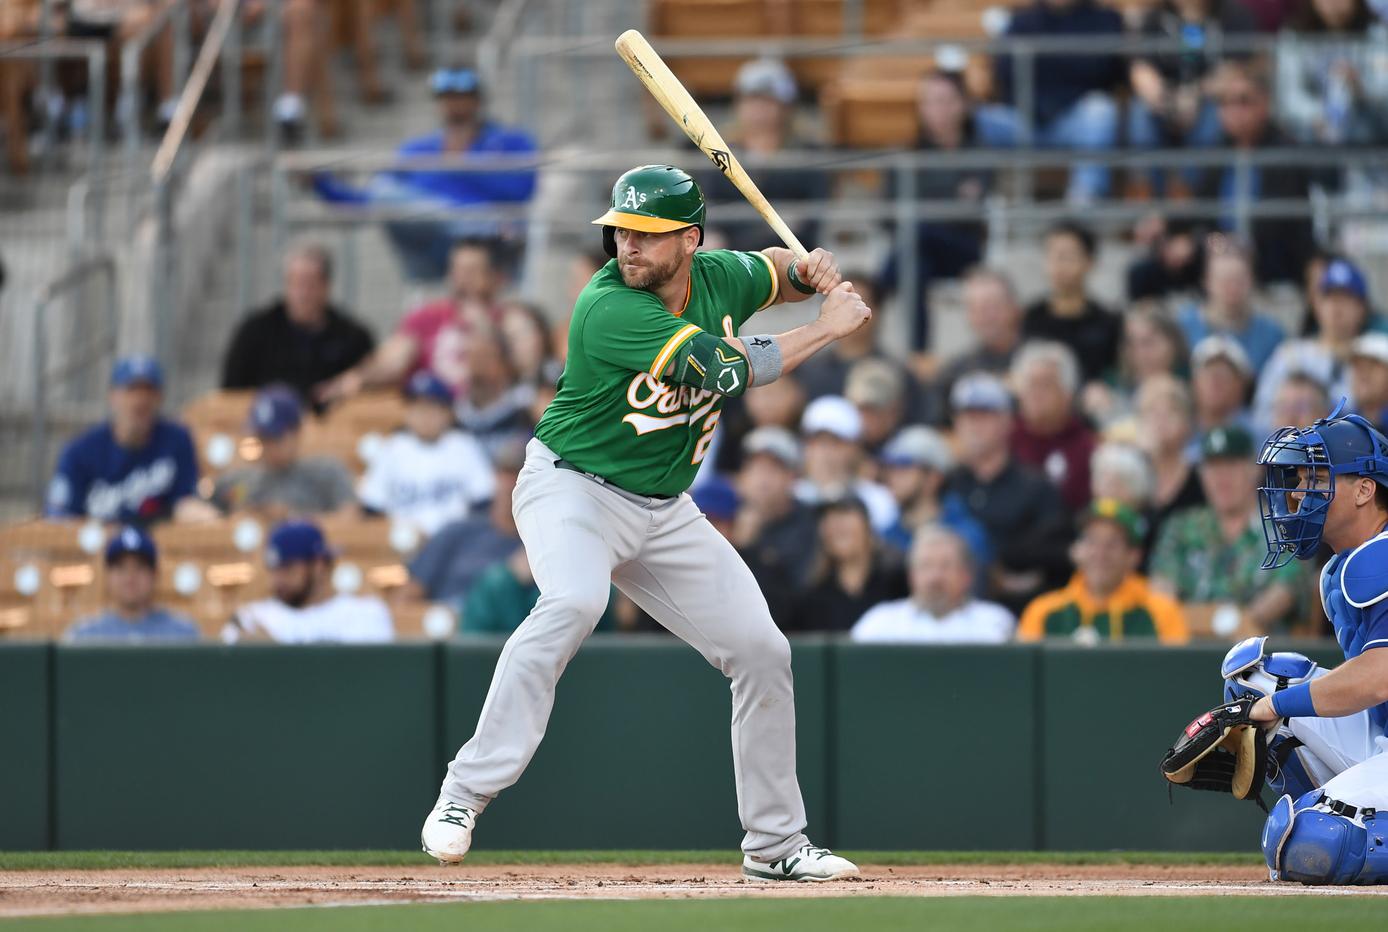 Athletics' Stephen Vogt ends career with kids introducing him, home run in  last AB: 'Can't even make it up